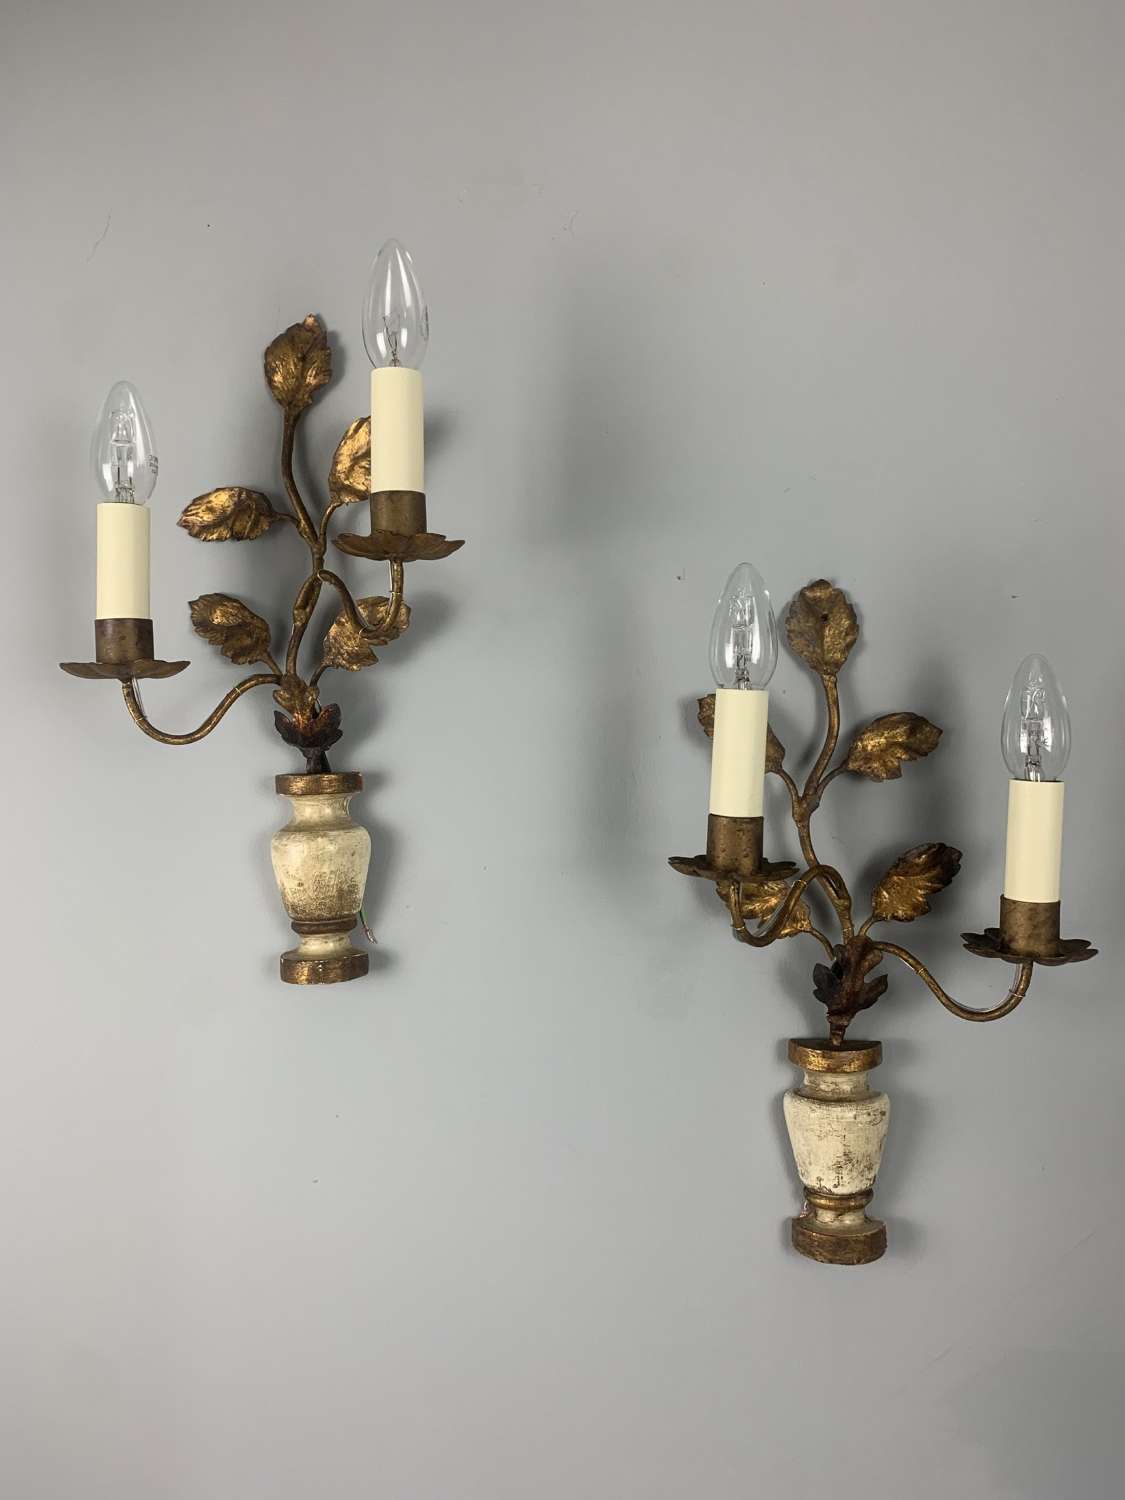 Pair Of French Gilt Decorative Toleware Antique Wall Lights, Rewired